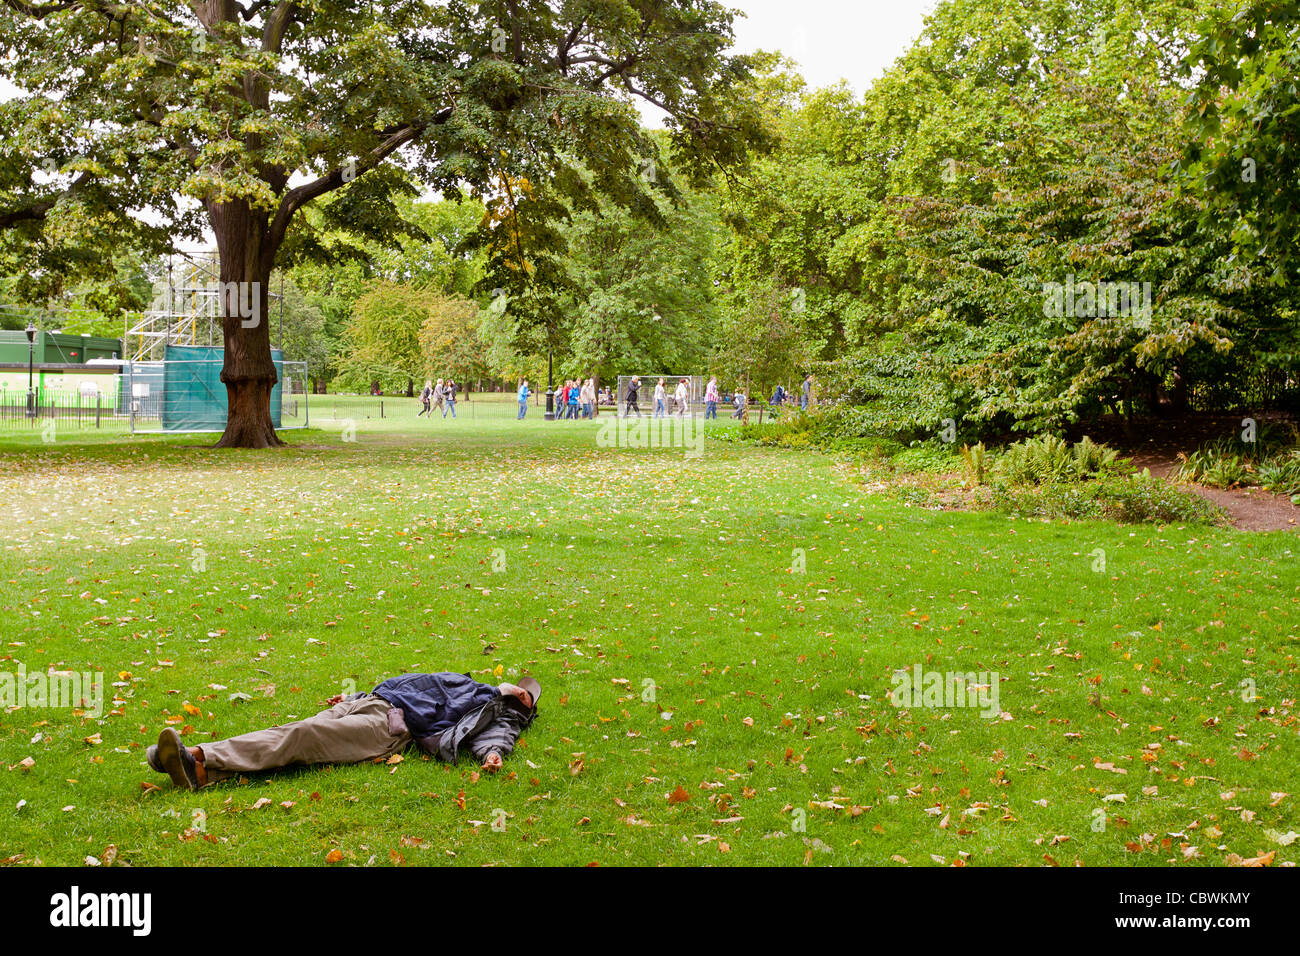 Homeless Man Sleeping In St James Park London England While